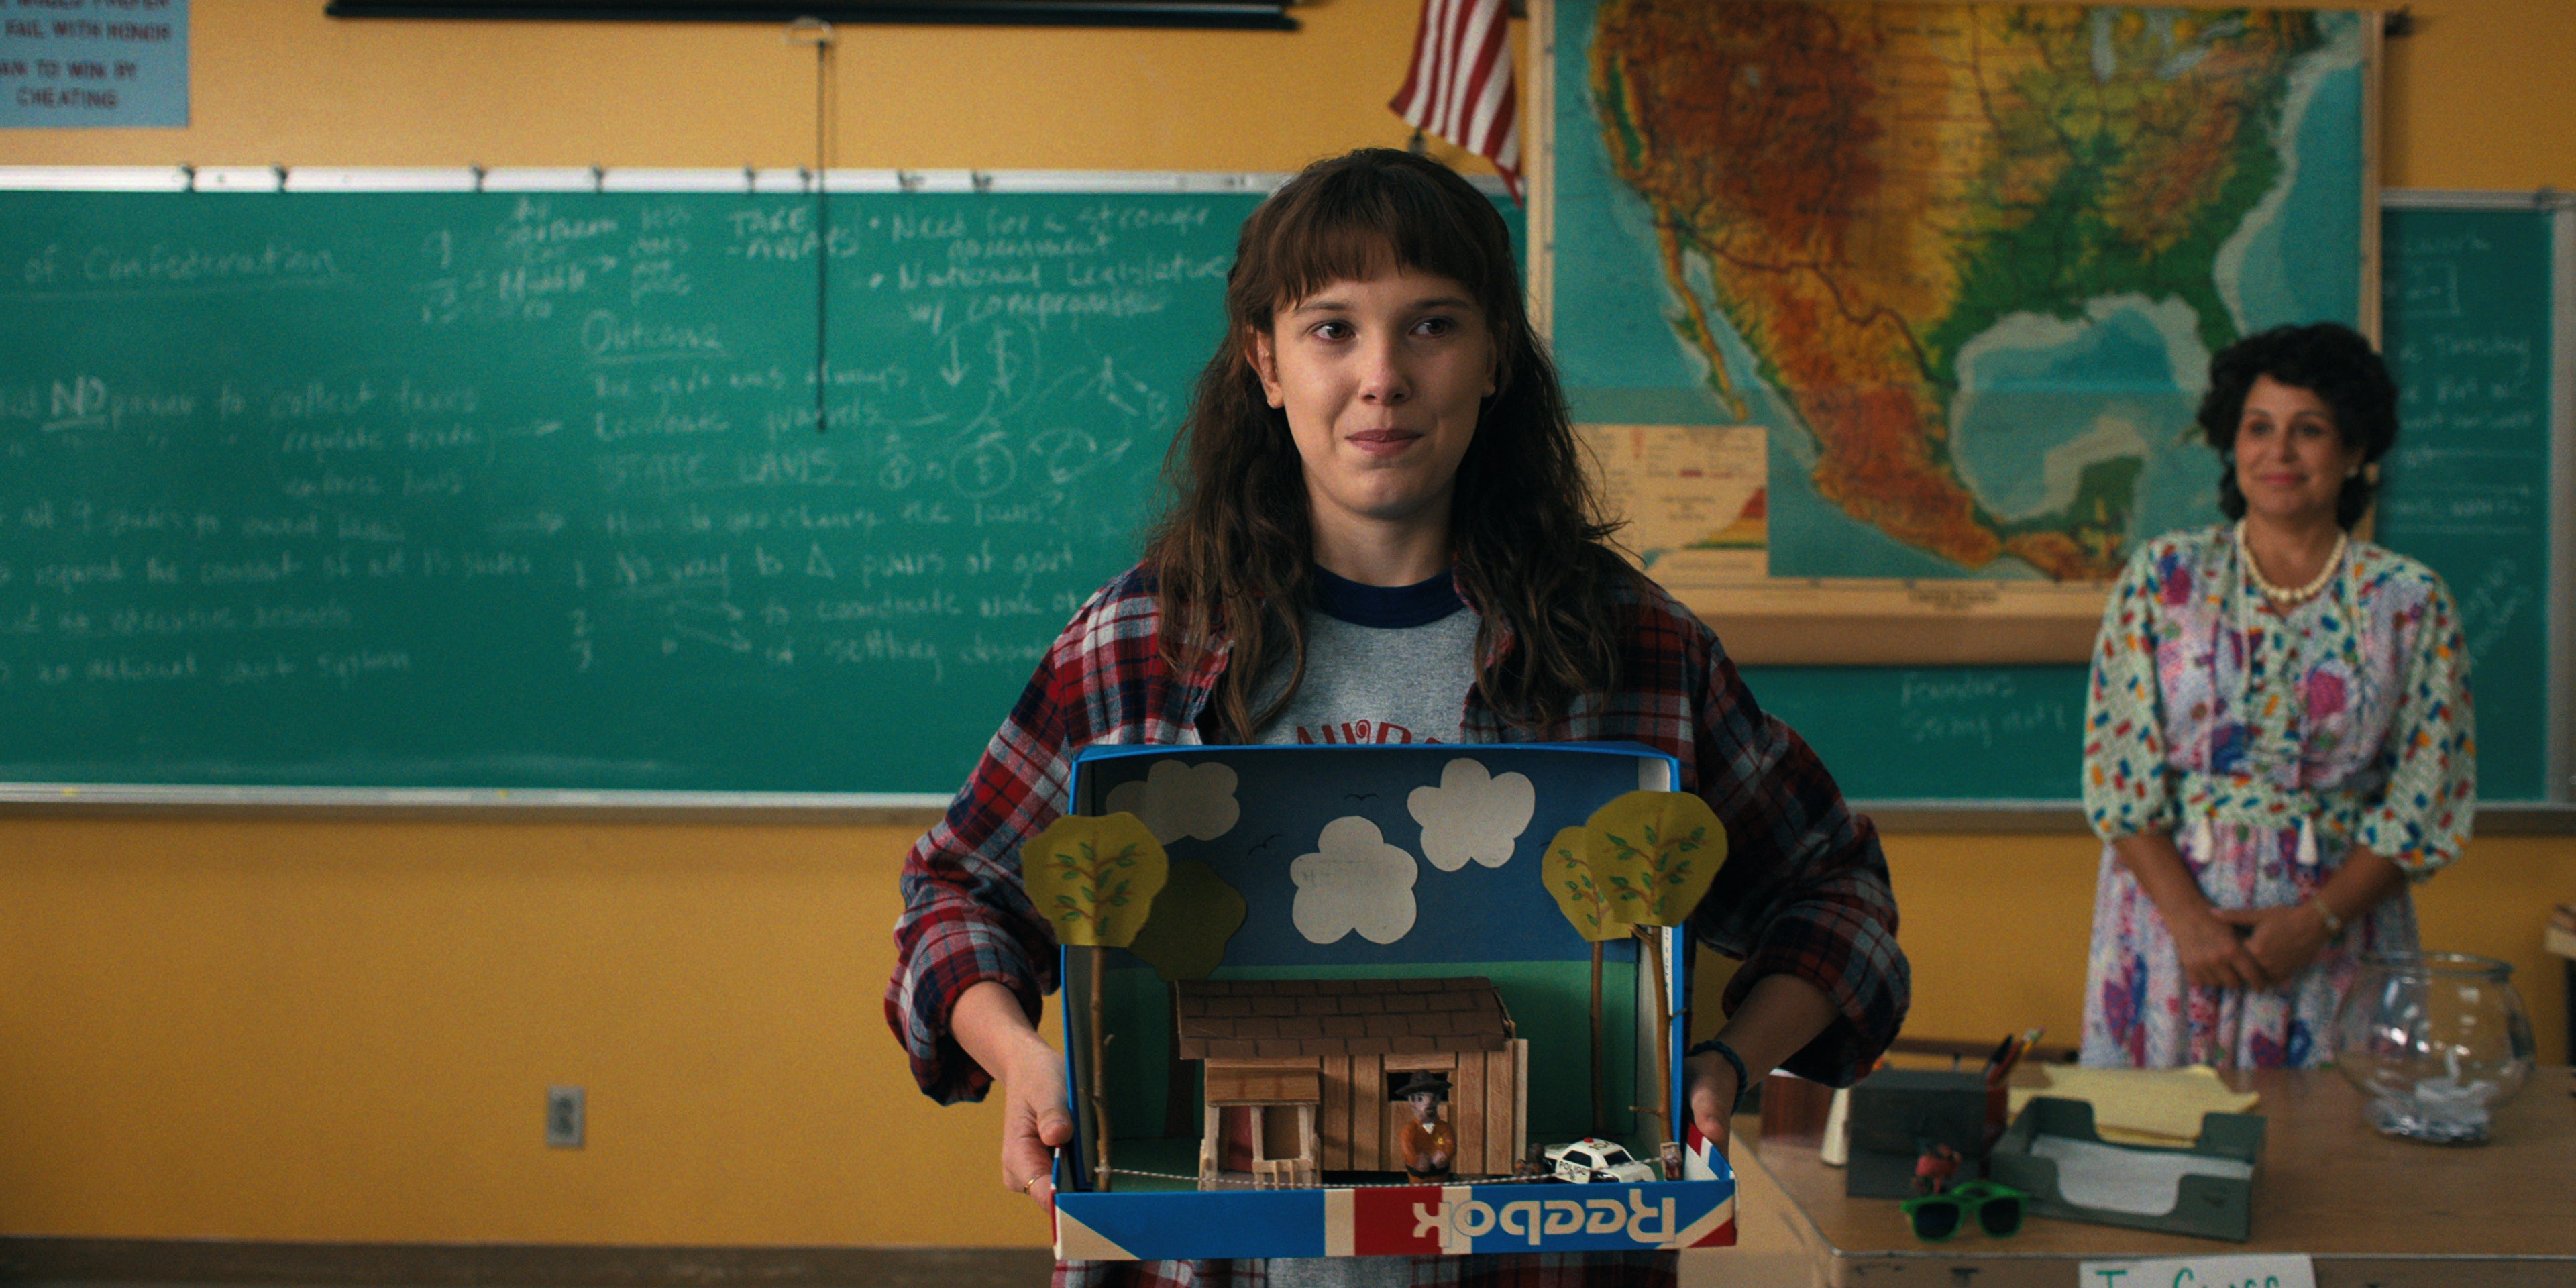 Eleven and her diorama. (Image: Netflix)